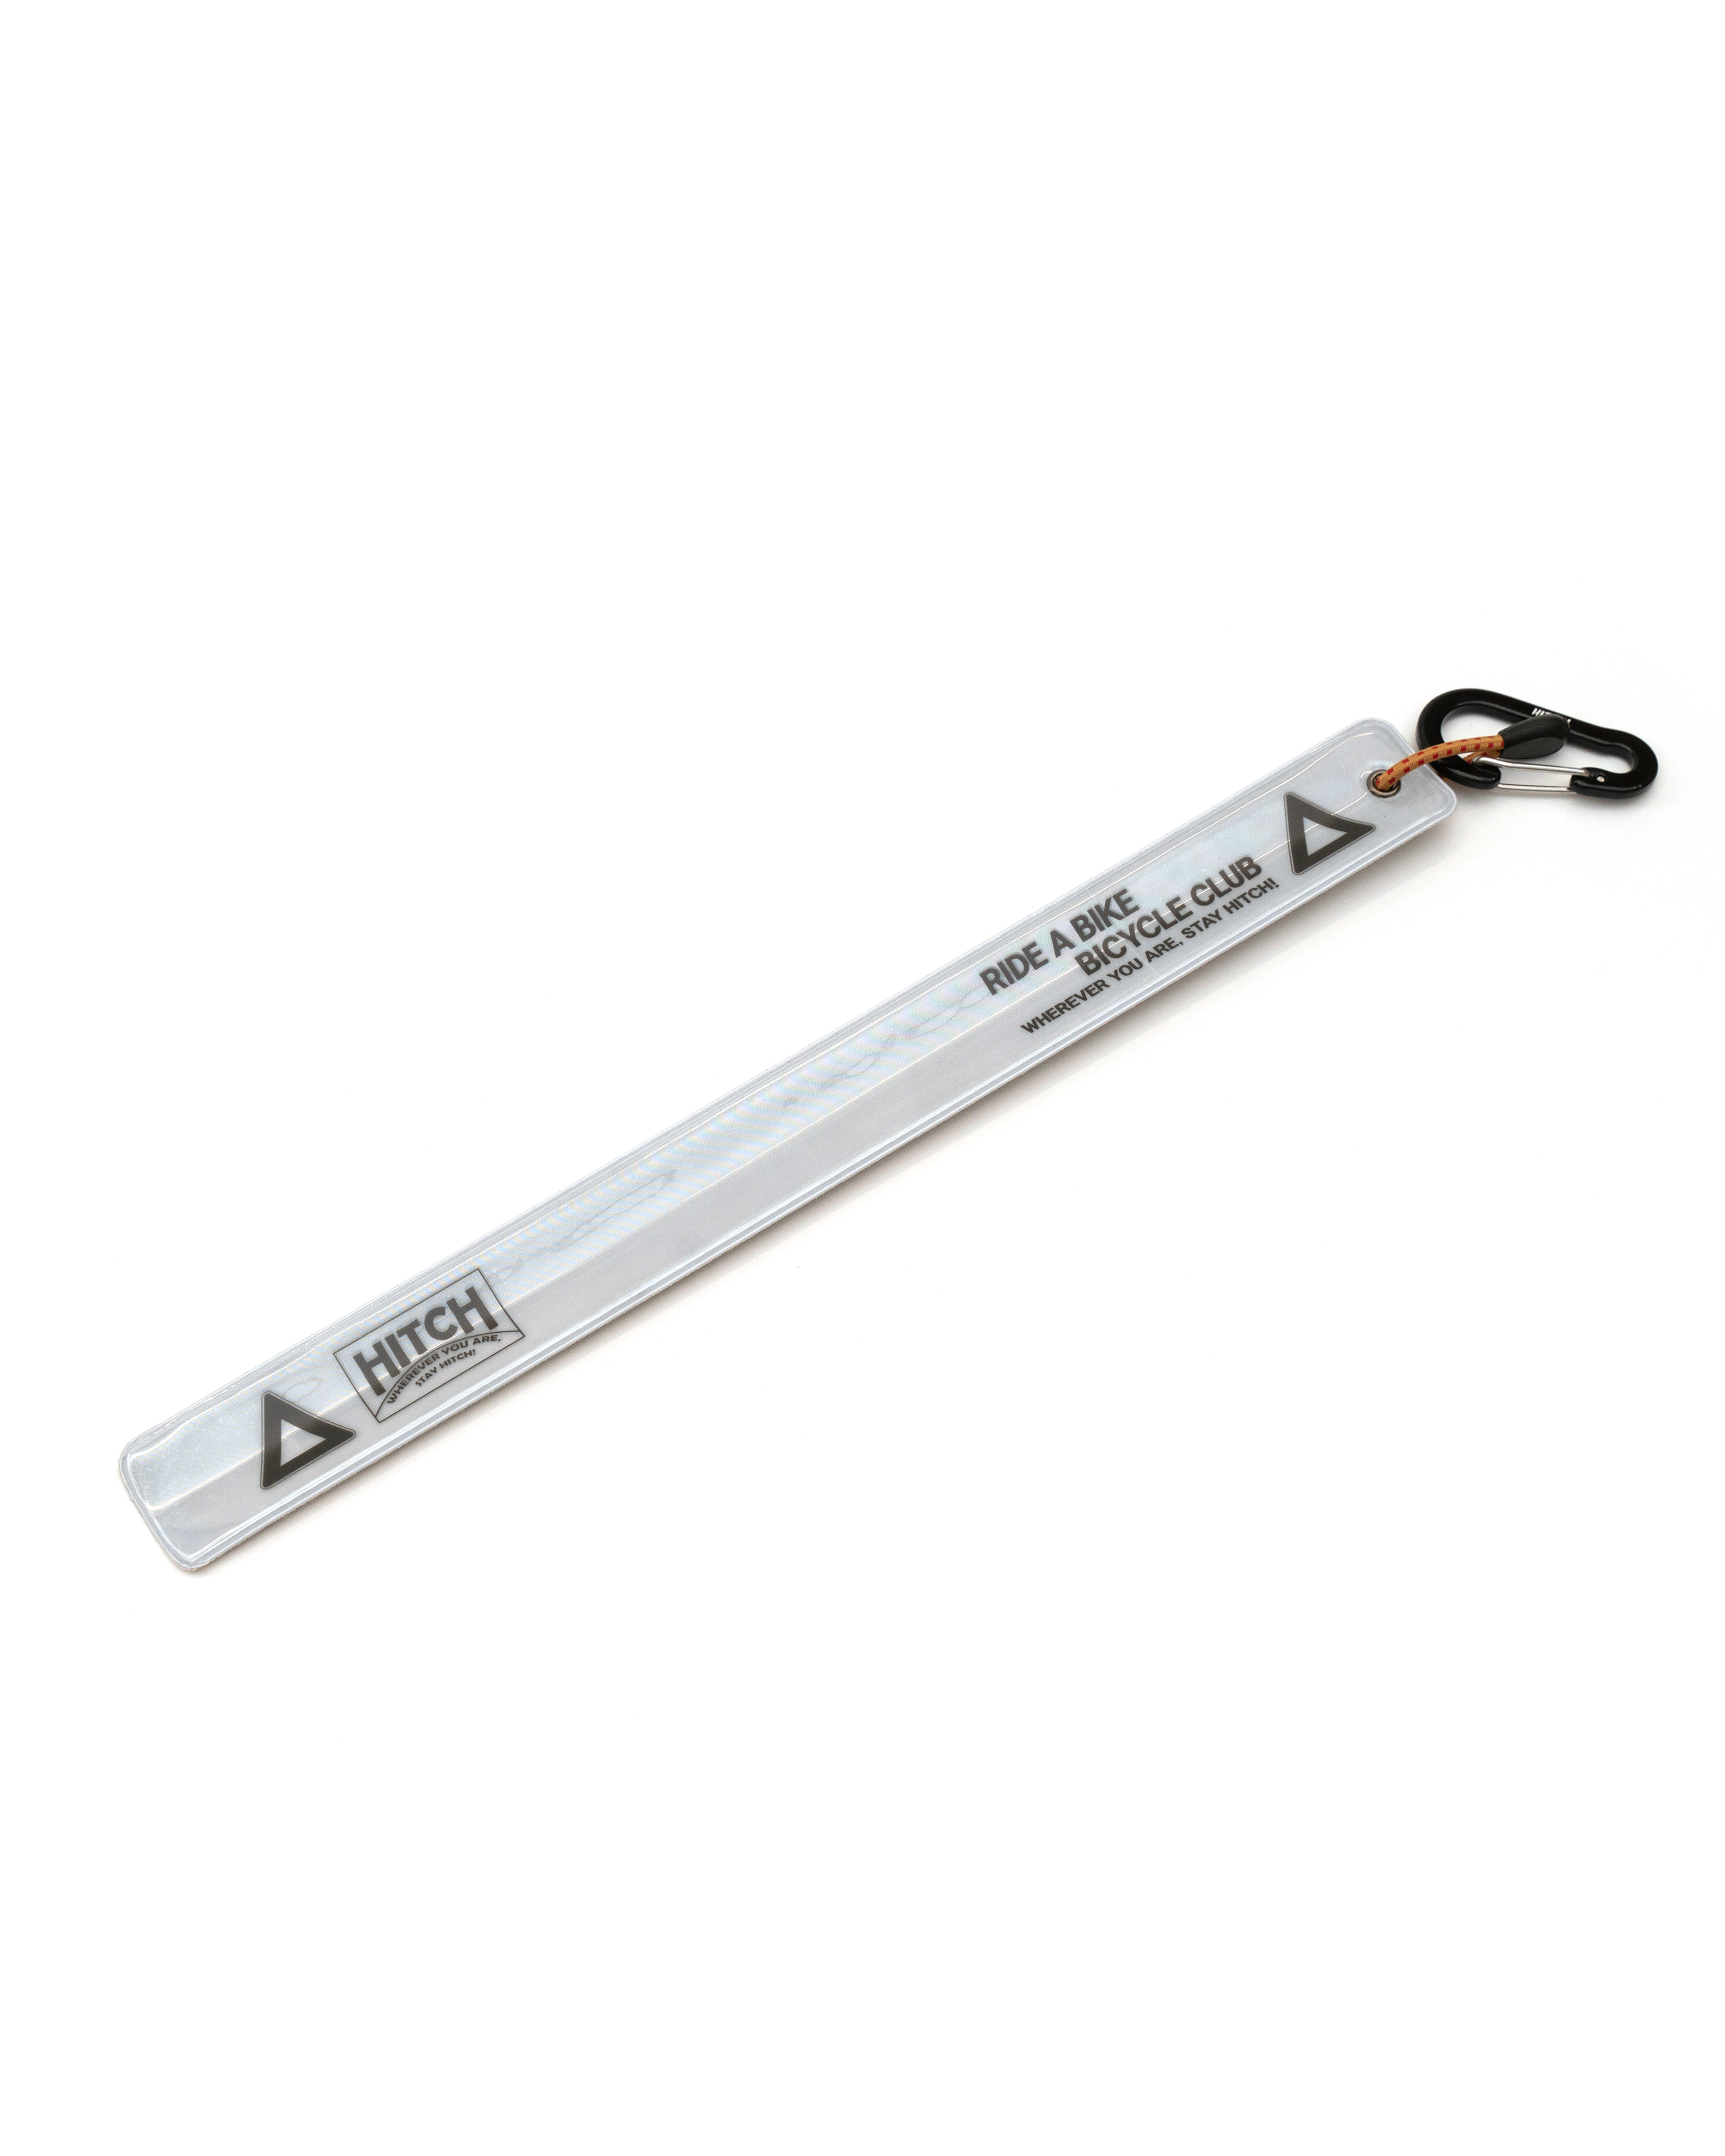 [out of stock] Reflector slapband - white